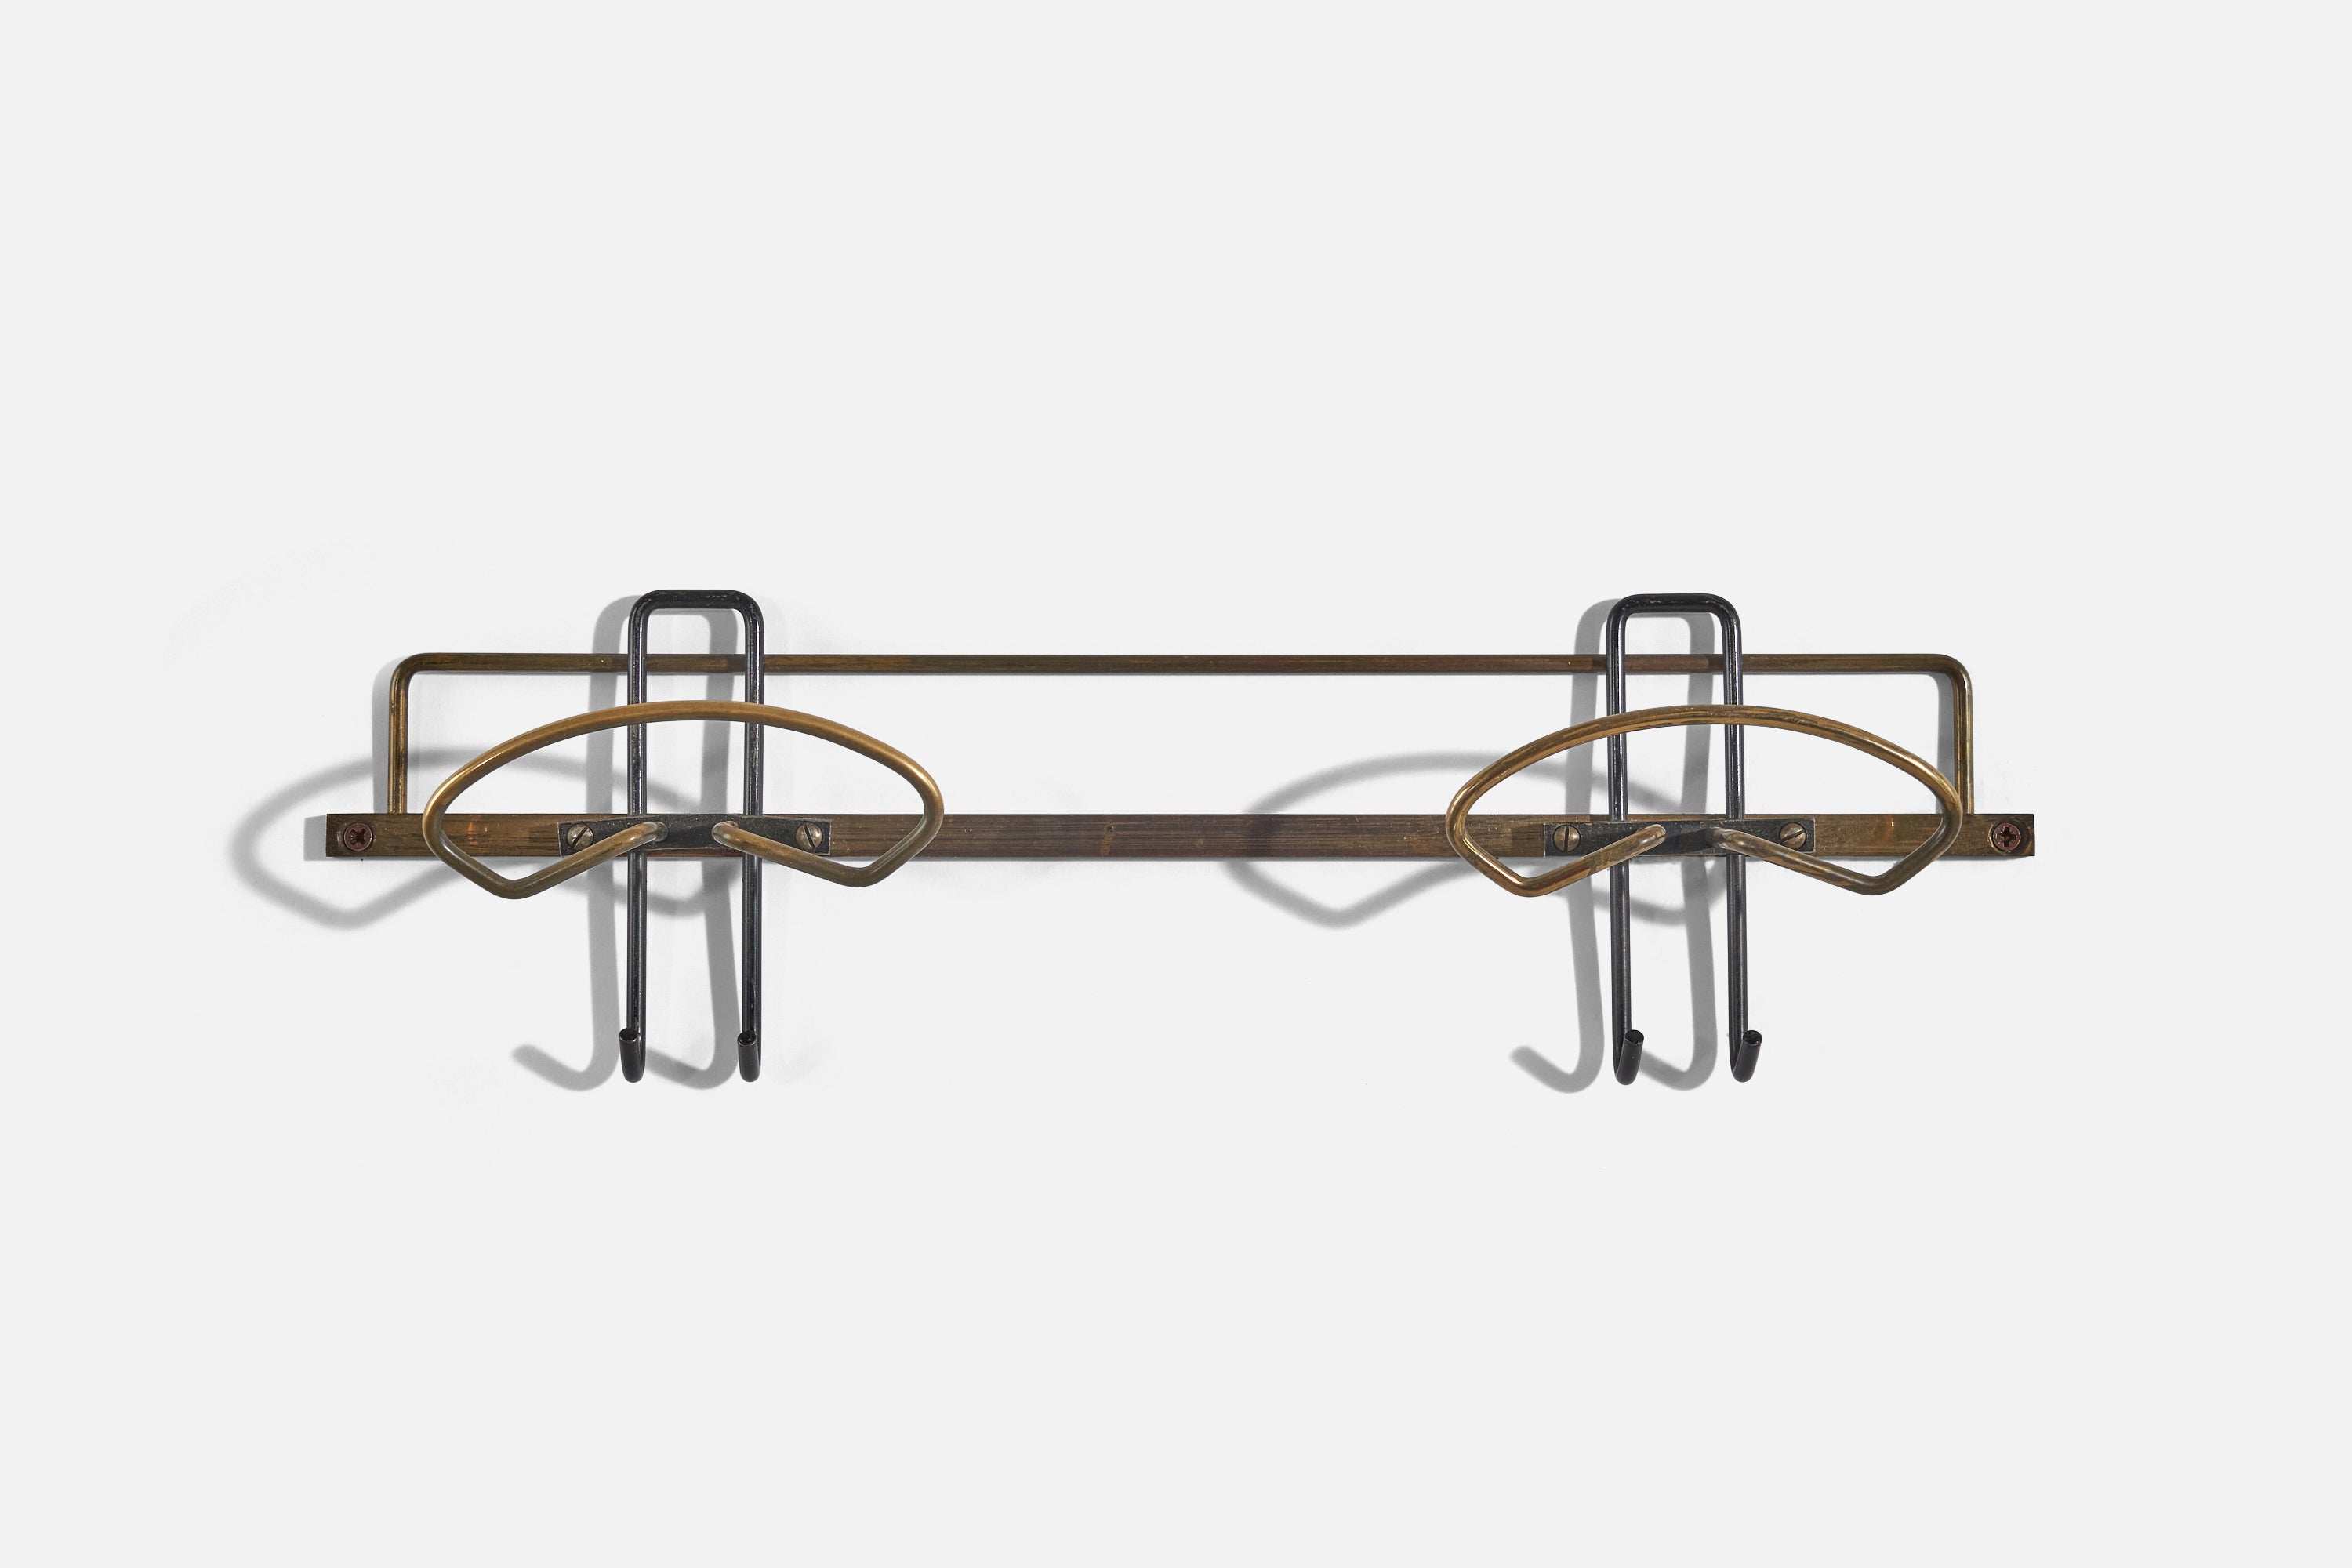 A brass coat hanger designed and produced by an Italian designer, Italy, 1950s.

Dimensions of back plate (inches) : (1.78 x 15.56 x .18).